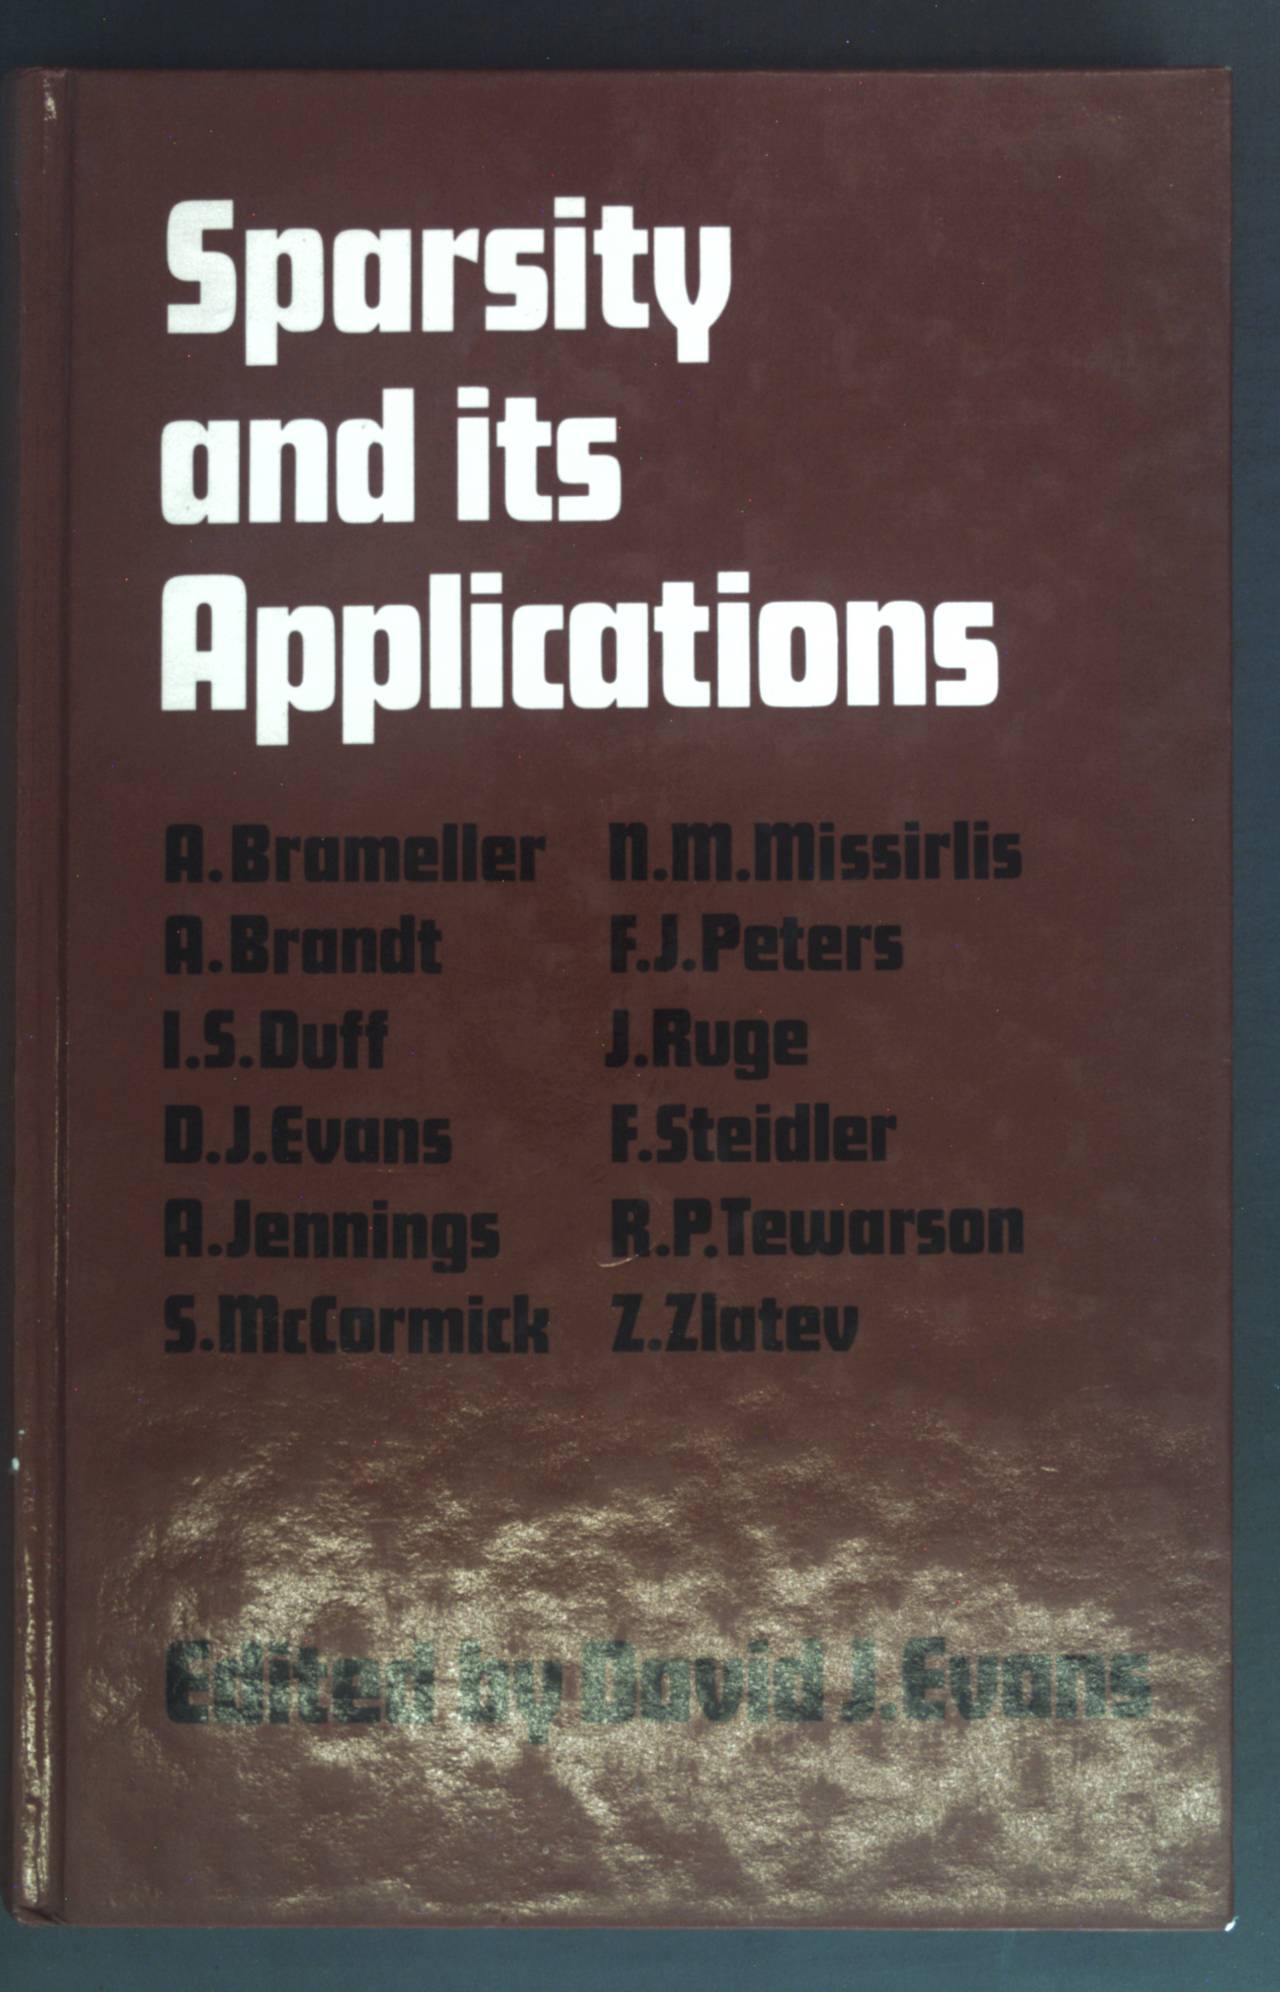 Sparsity and its Applications - Evans, David J.